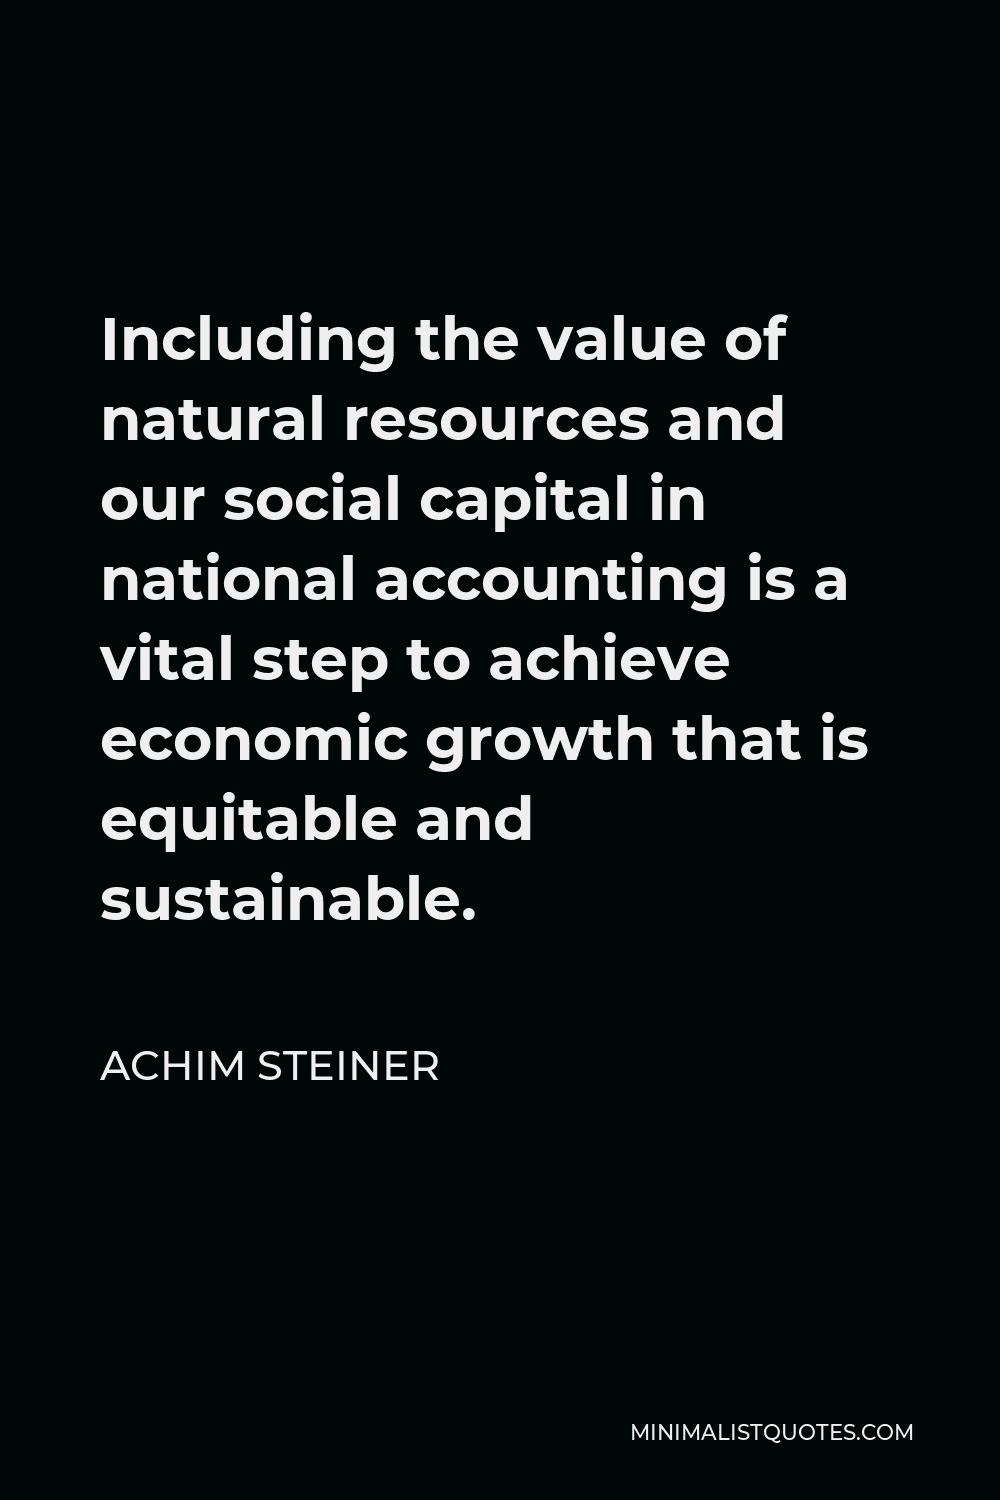 Achim Steiner Quote - Including the value of natural resources and our social capital in national accounting is a vital step to achieve economic growth that is equitable and sustainable.